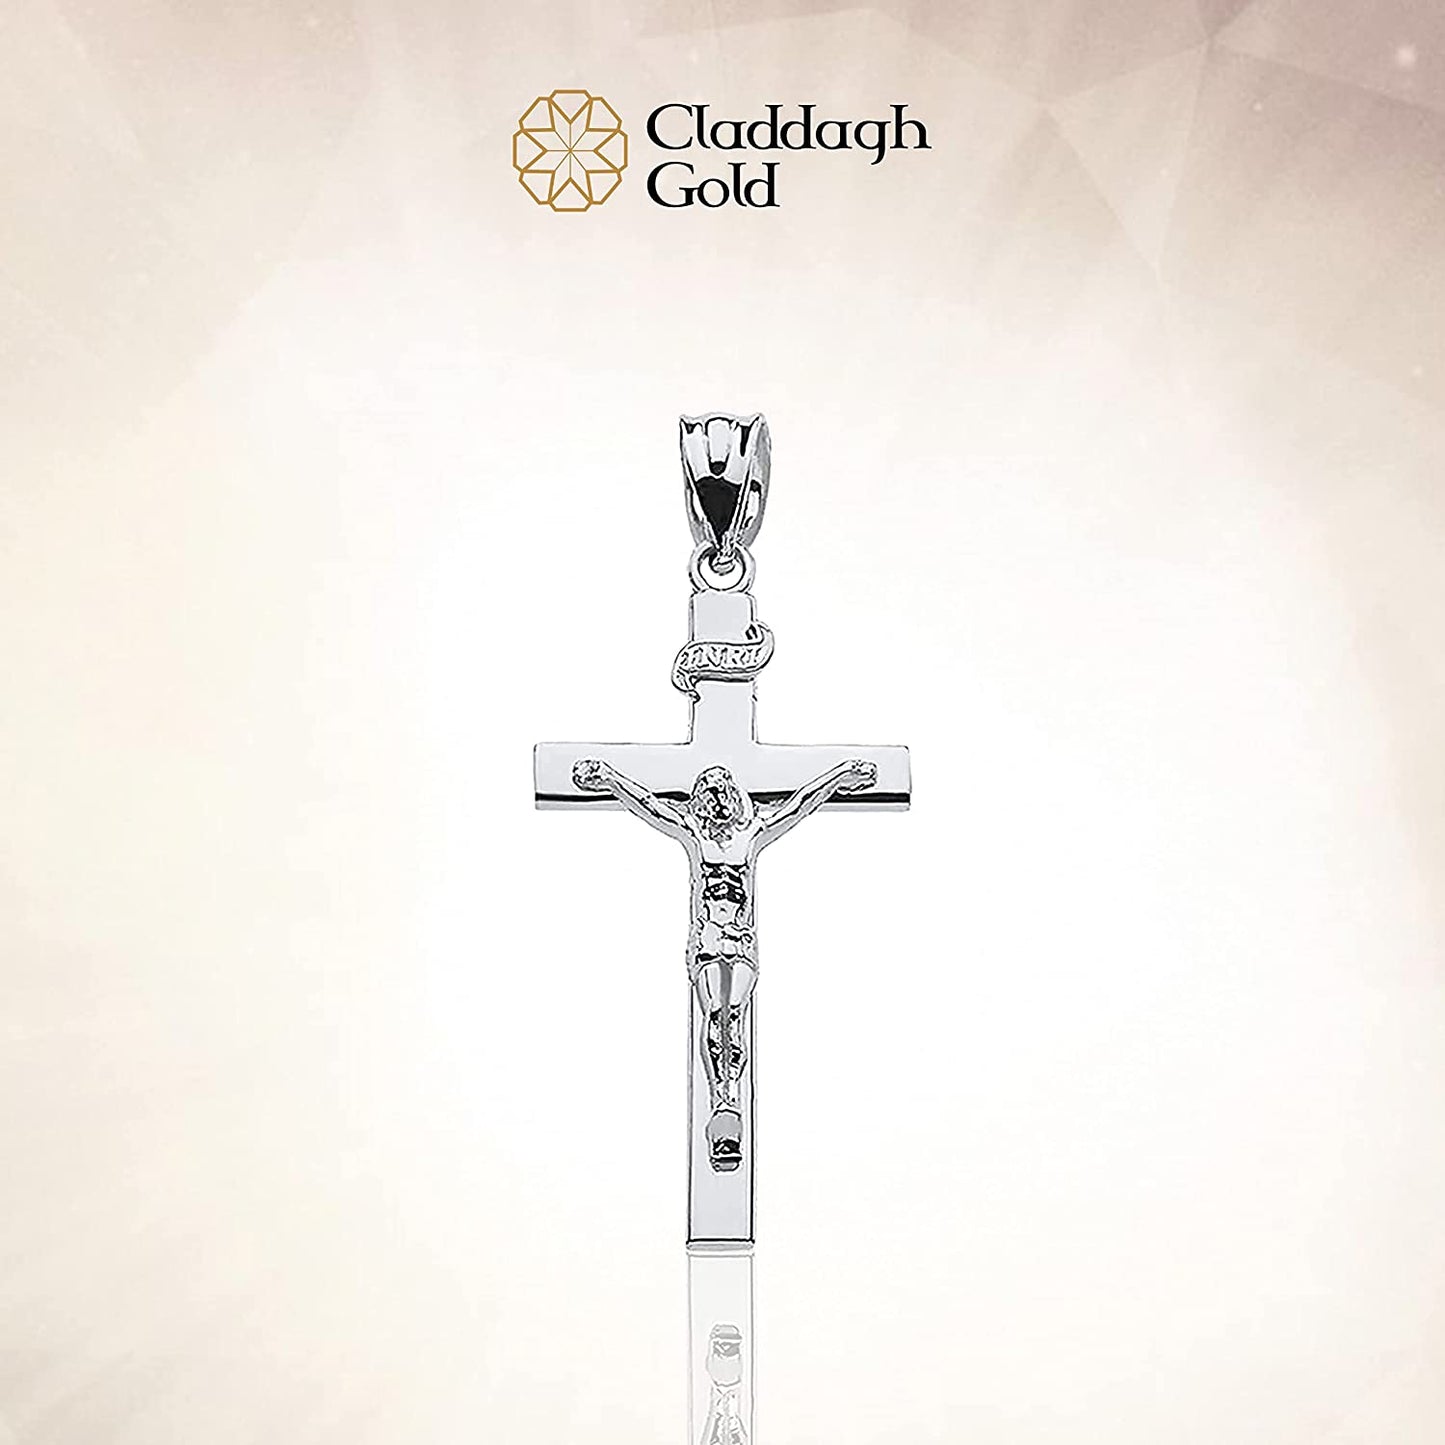 .925 Sterling Silver Linear Cross INRI Crucifix Charm Pendant Religious Jewelry - Choice of Size (S-L)